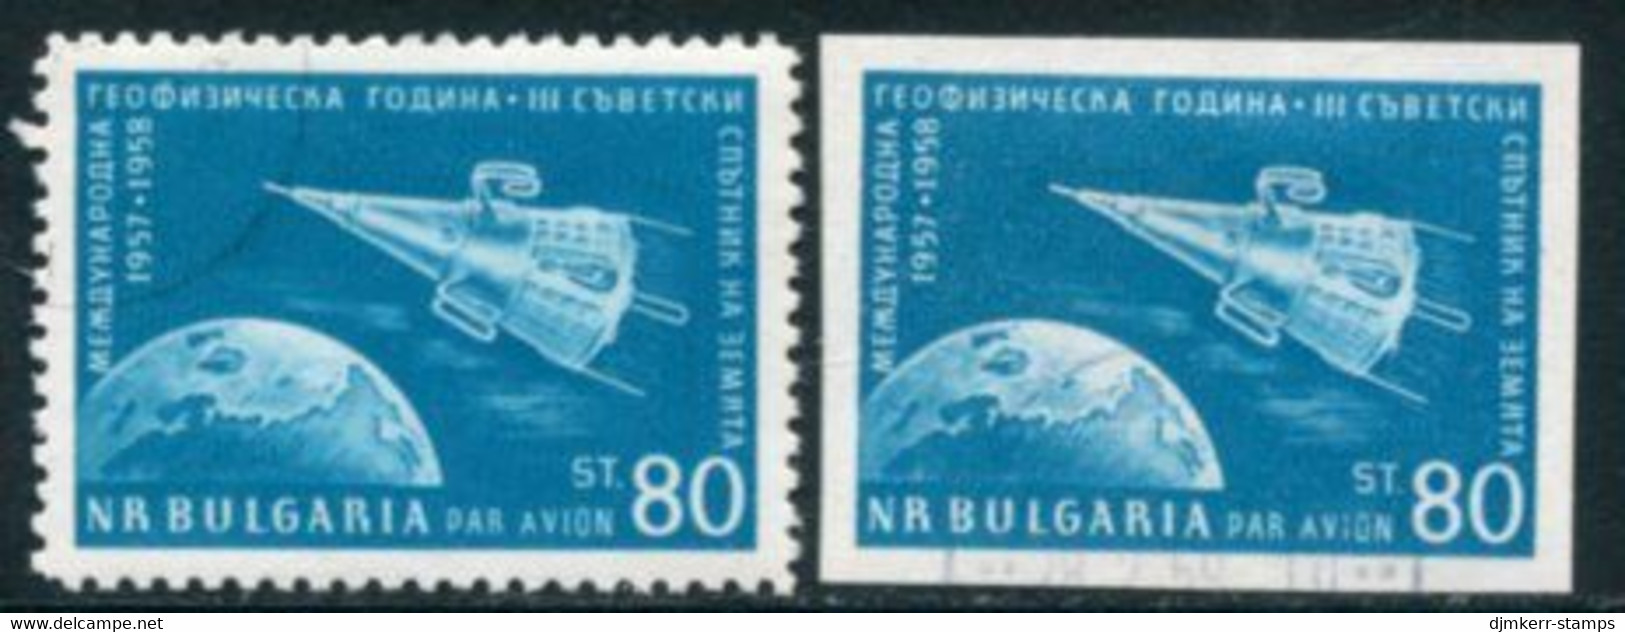 BULGARIA 1958 International Geophysical Year Used.  Michel 1094A-B - Used Stamps